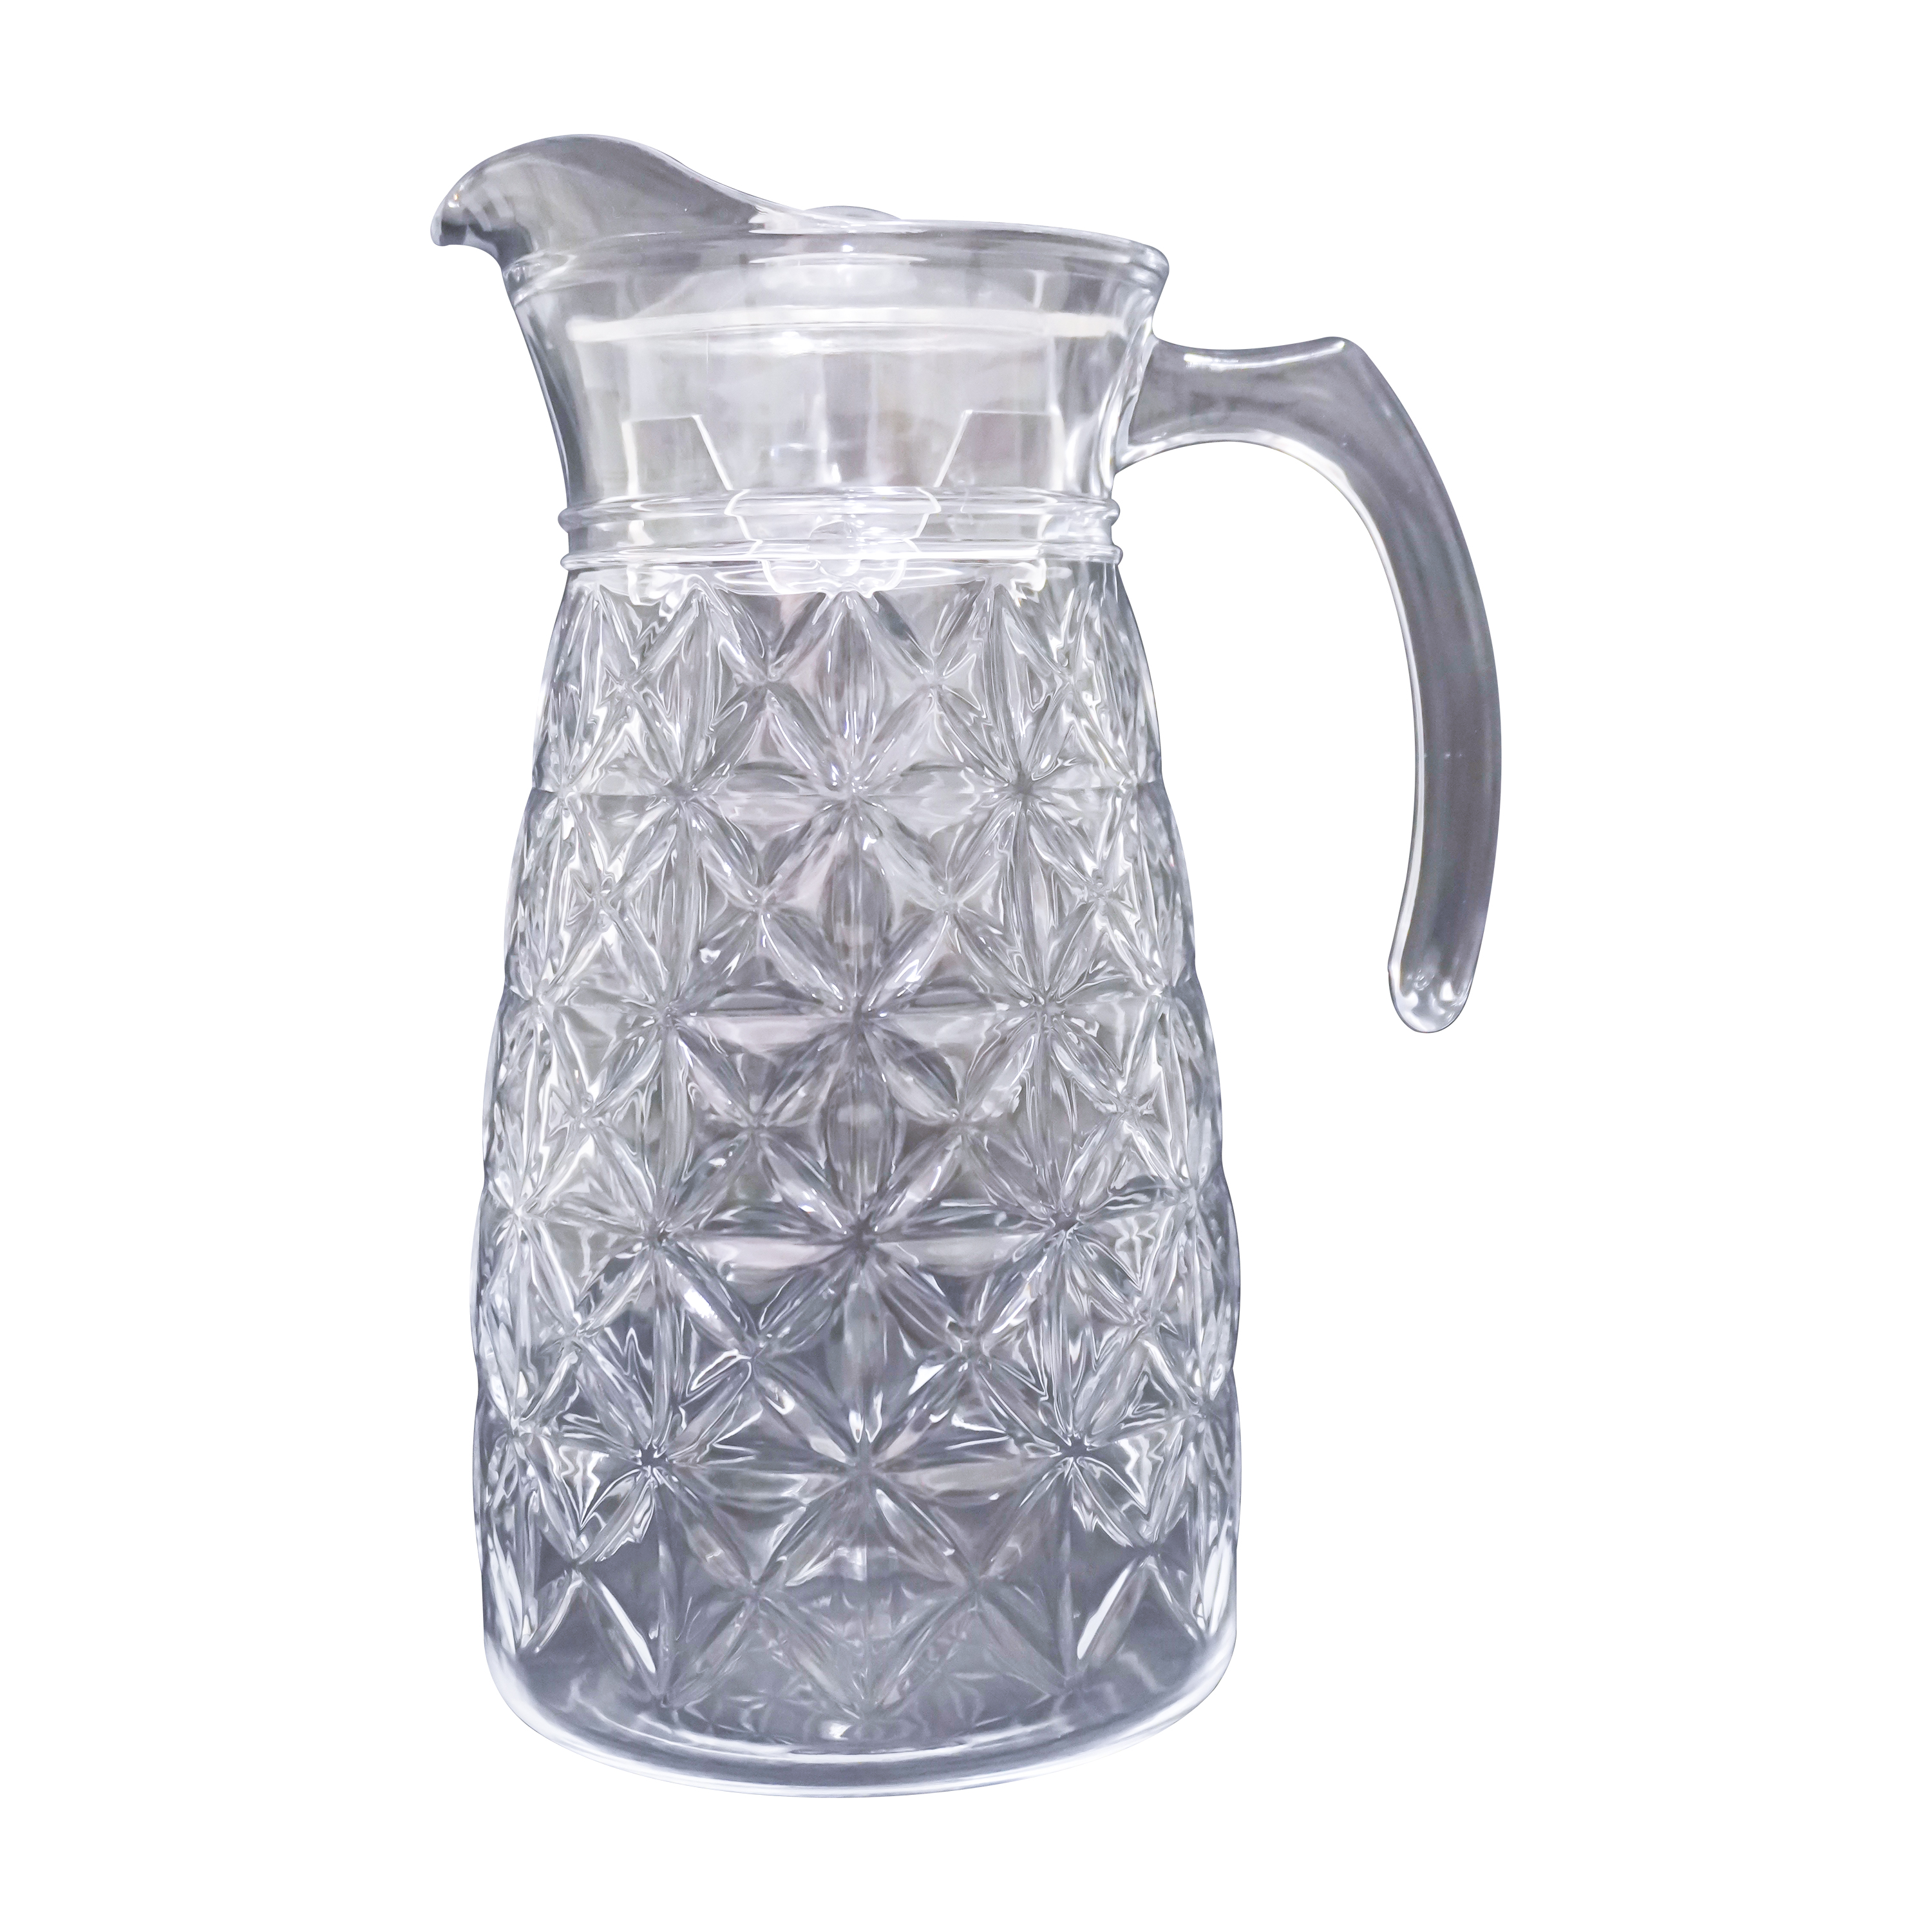 Little Homes Glass Jug With Lid 1.8L - Diamond